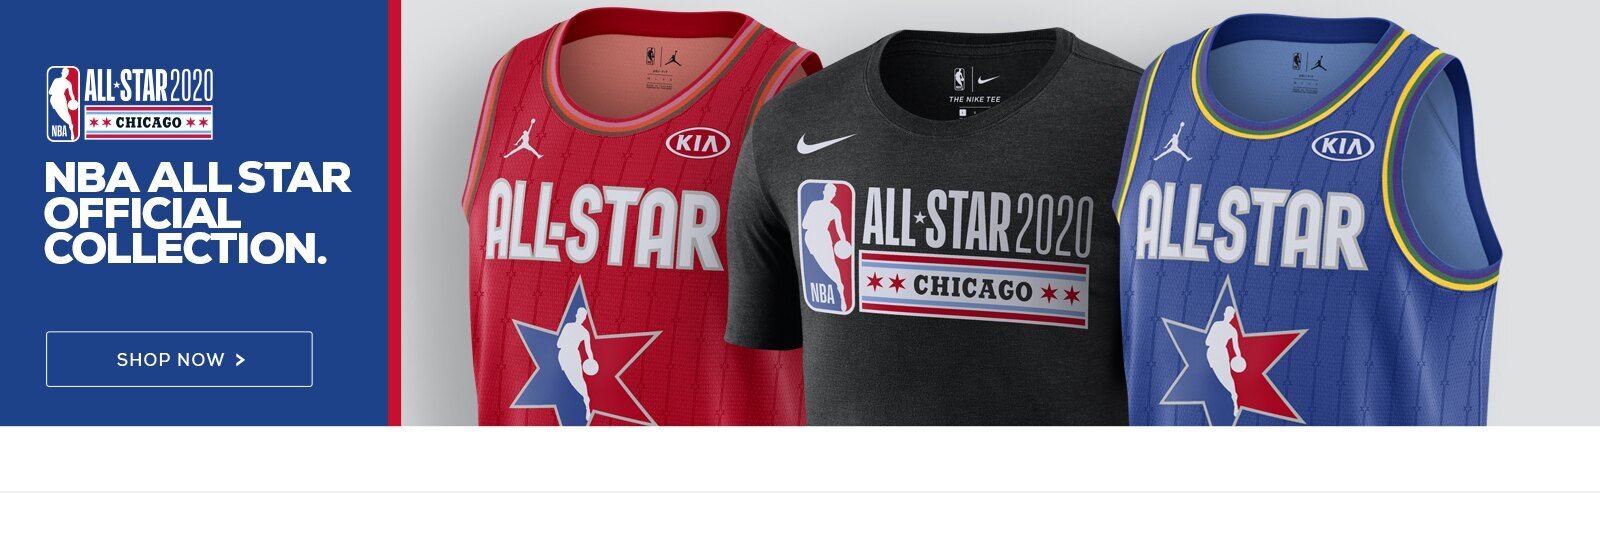 chicago all star jersey 2020